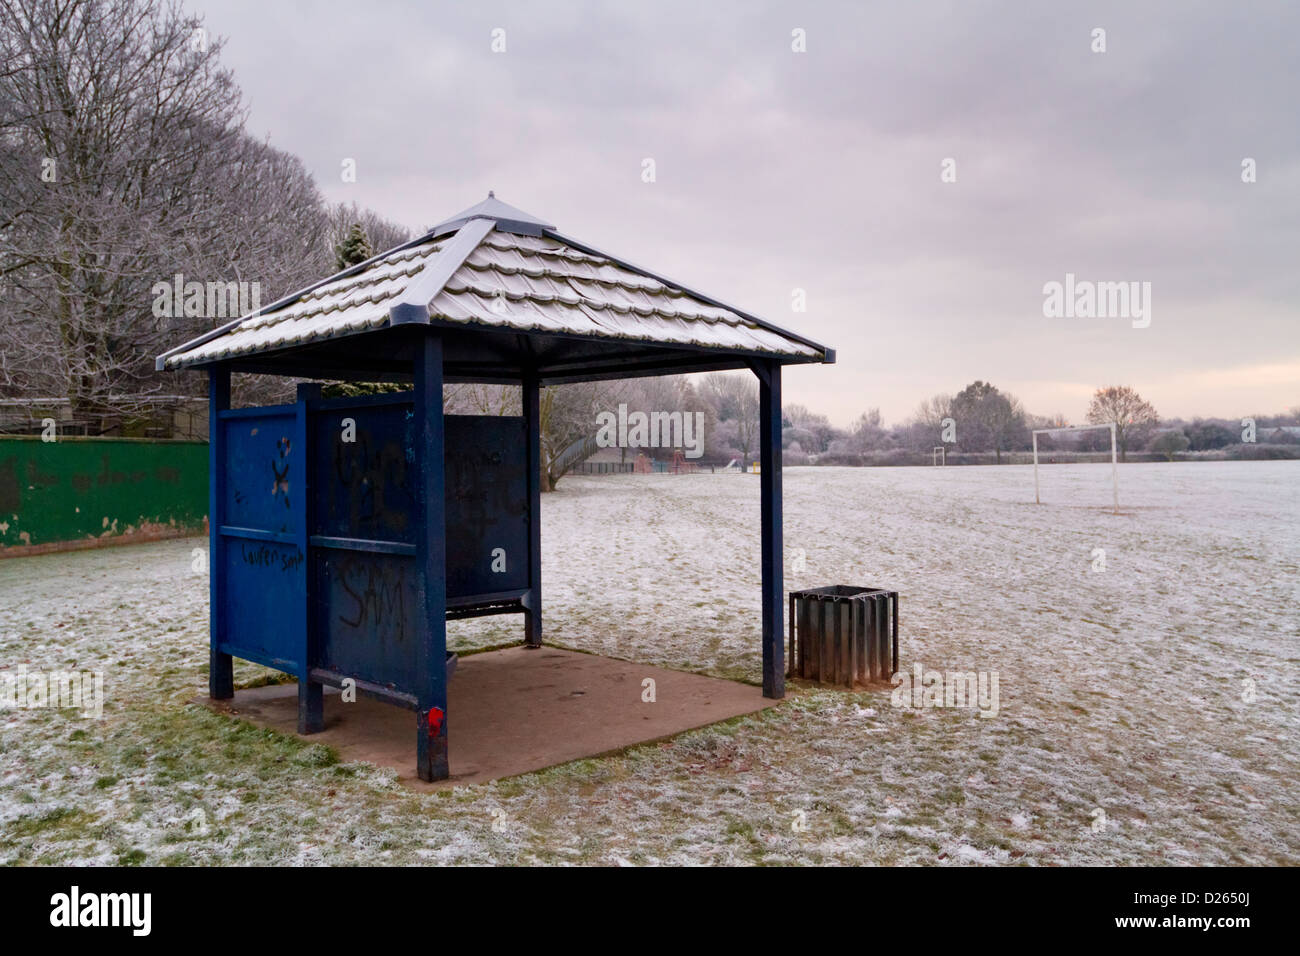 A cold snow covered shelter in an empty public park in winter, Nottinghamshire, England, UK Stock Photo